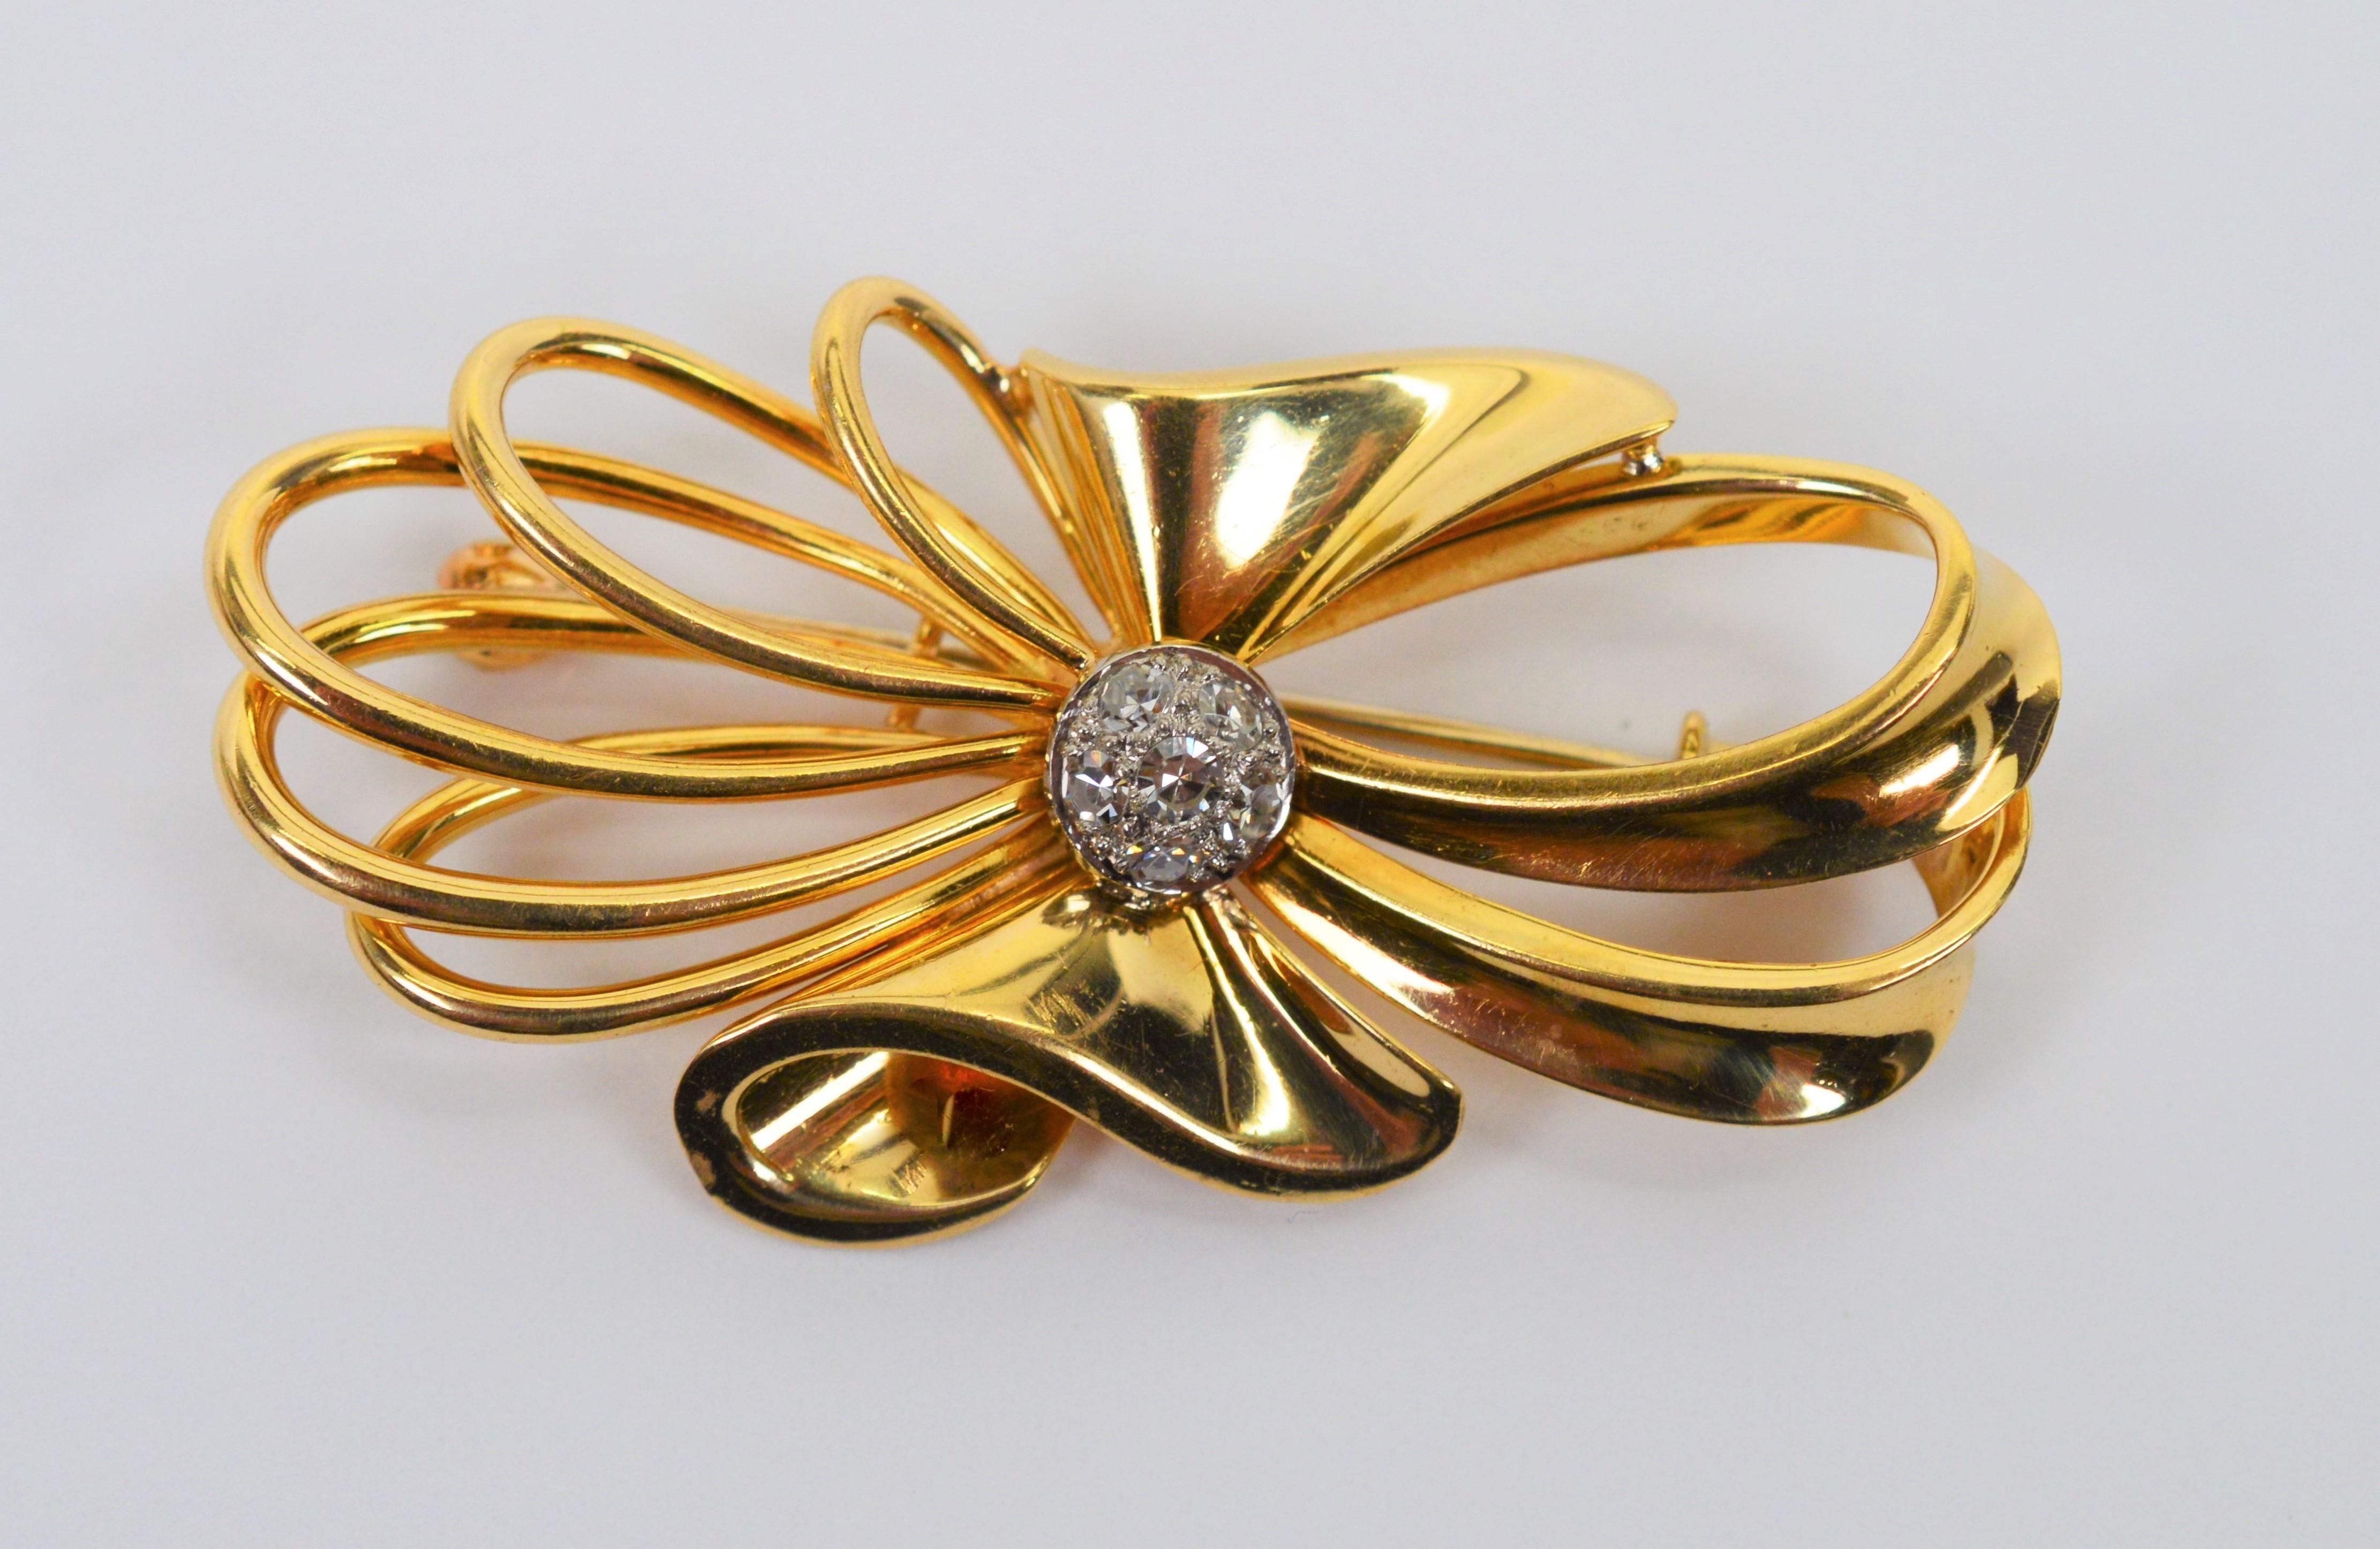 Add a bit of flair to a jacket lapel or blouse with this darling vintage gold diamond bowtie brooch. Stylish swirls of eighteen karat 18K yellow gold create a whimsical bow synched at the center and is accented with six .05 carat round H/SI 